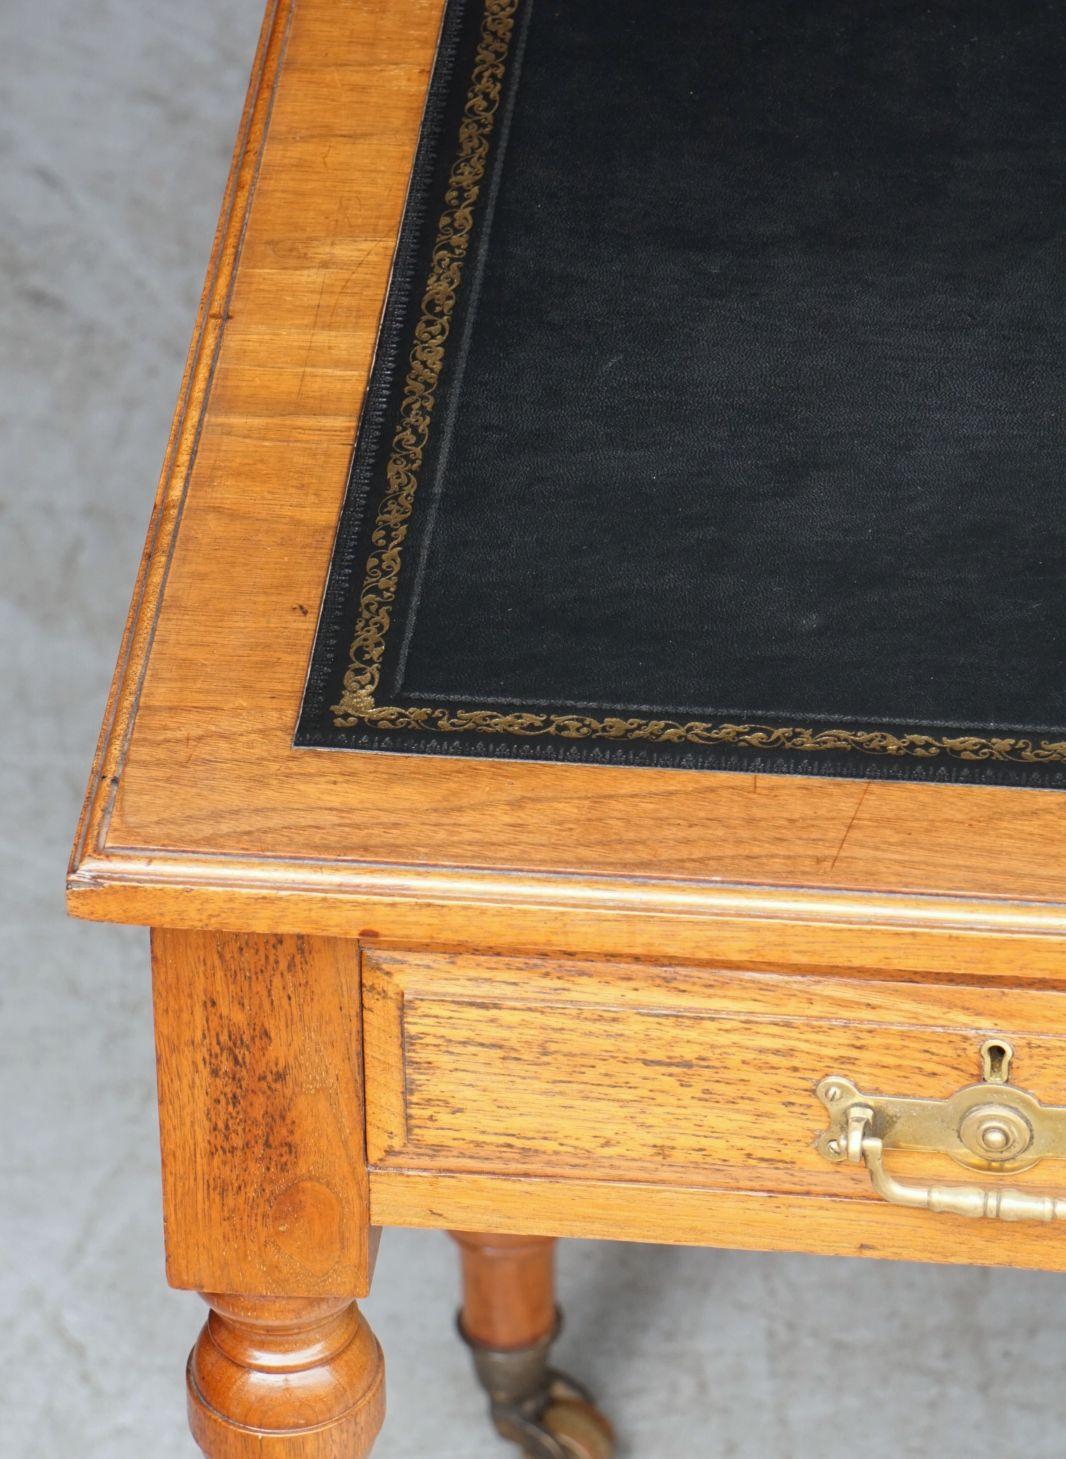 English Writing Desk or Table of Walnut with Embossed Black Leather Top 3